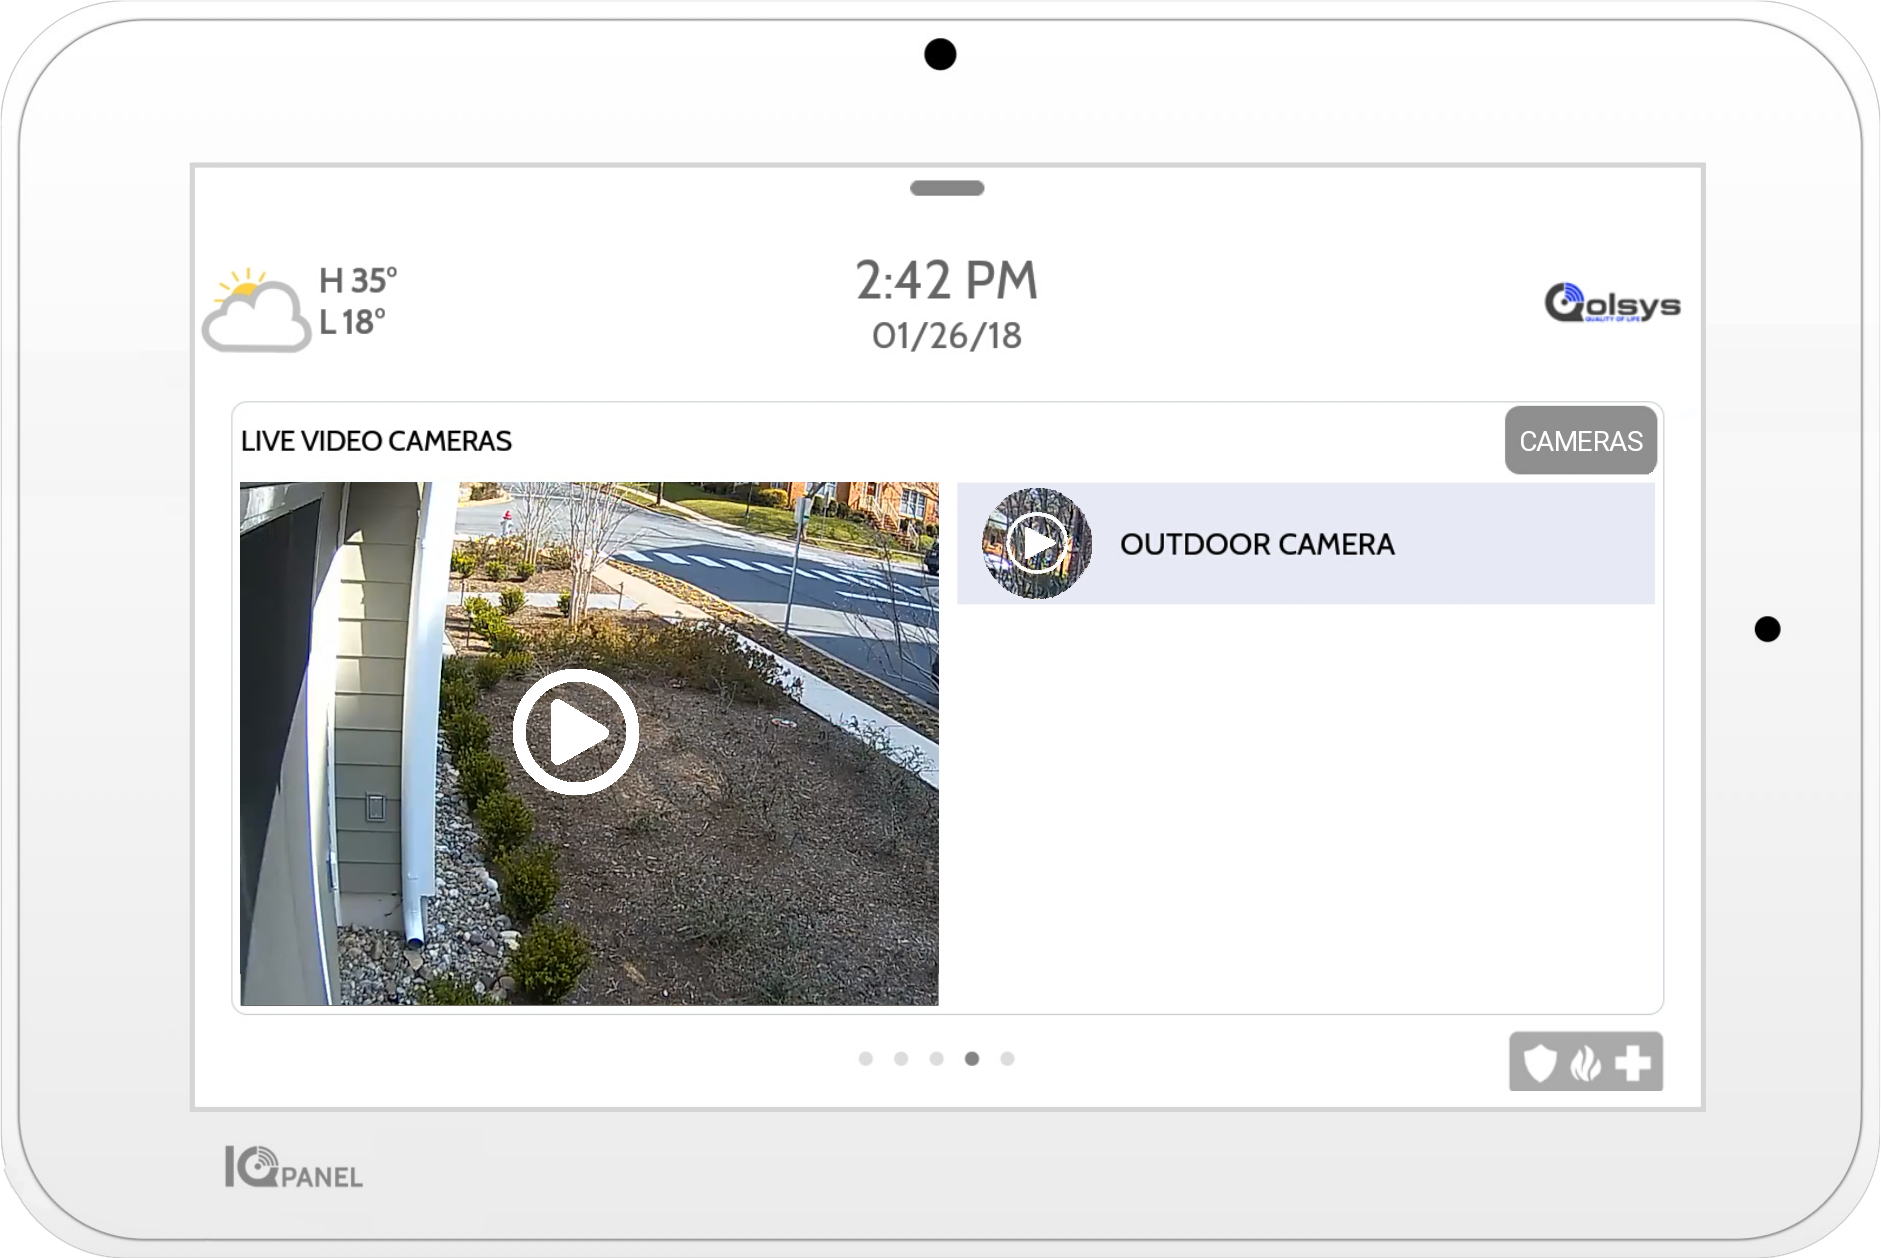 Image of the Qolsys Live Video Feed screen